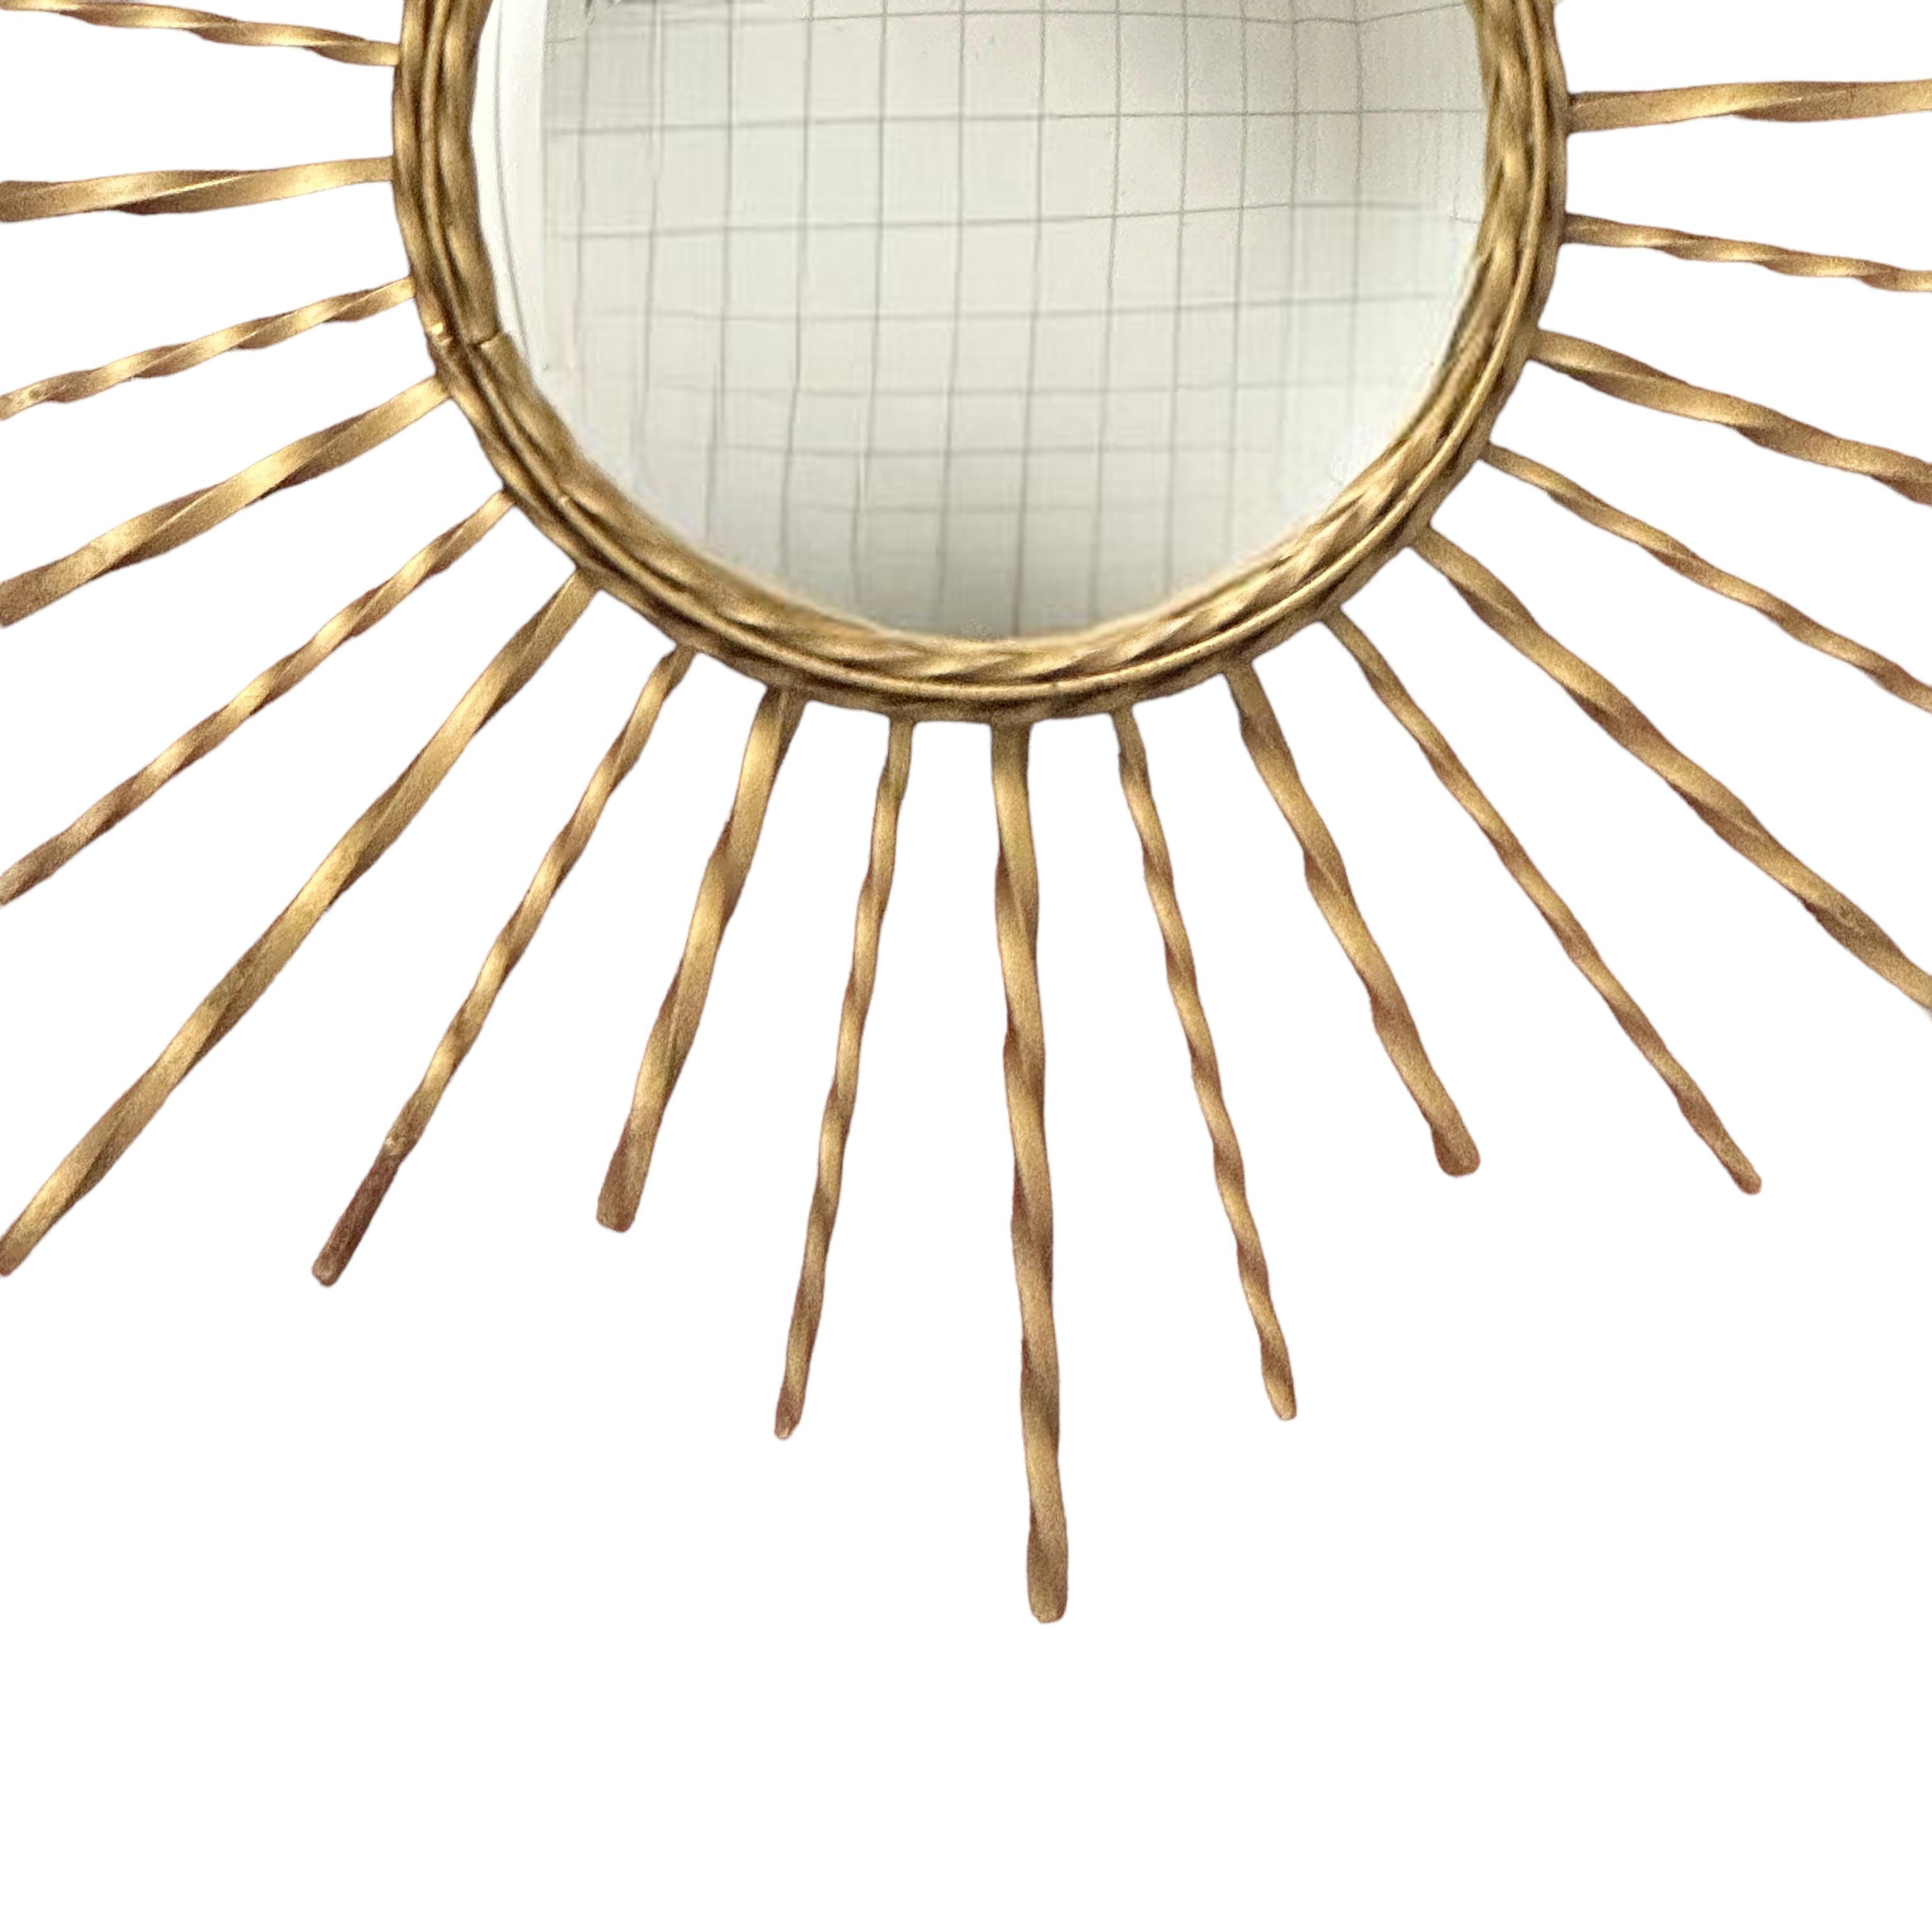 Stunning Large Vallauris Style Starburst Sunburst Convex Mirror Wall Lamp 1950s In Good Condition For Sale In Nuernberg, DE